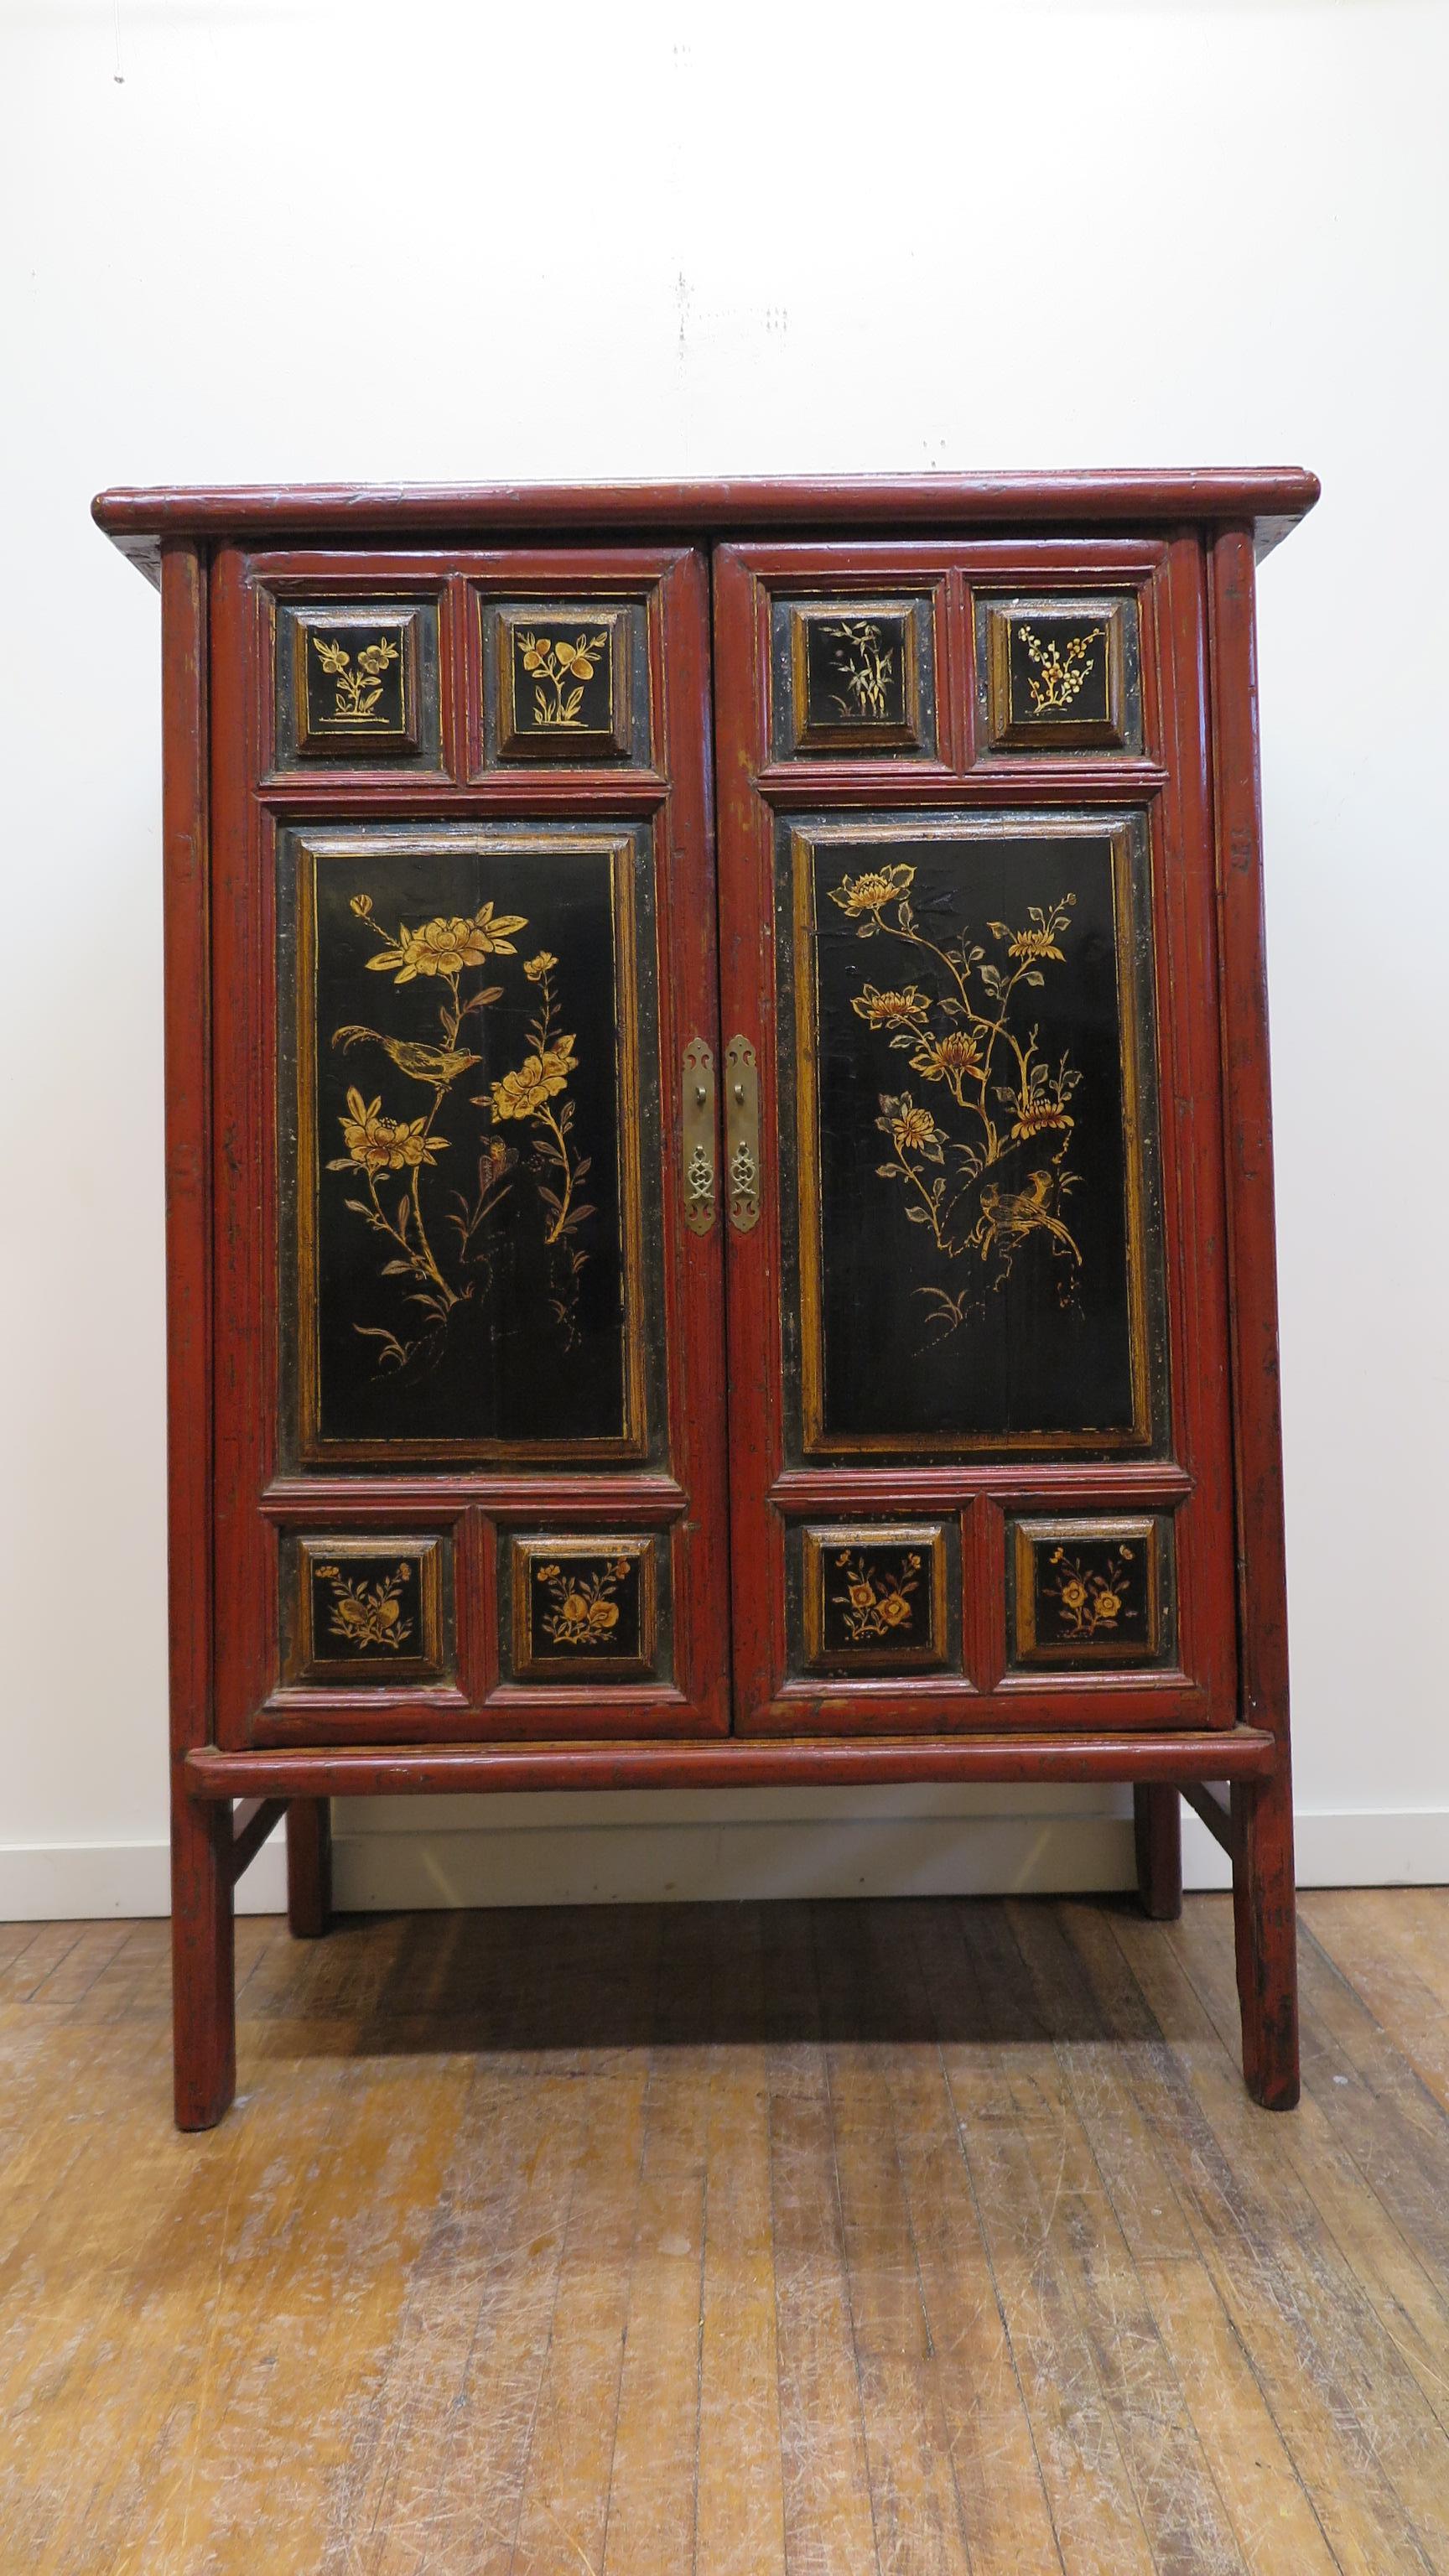 19th century painted tapered Chinese cabinet. Having elaborate panels with gilt painting and raised moldings. Warm red lacquer adorned with black lacquer and gilt painting. Framing the panels recessed into the molding are remnants of crushed